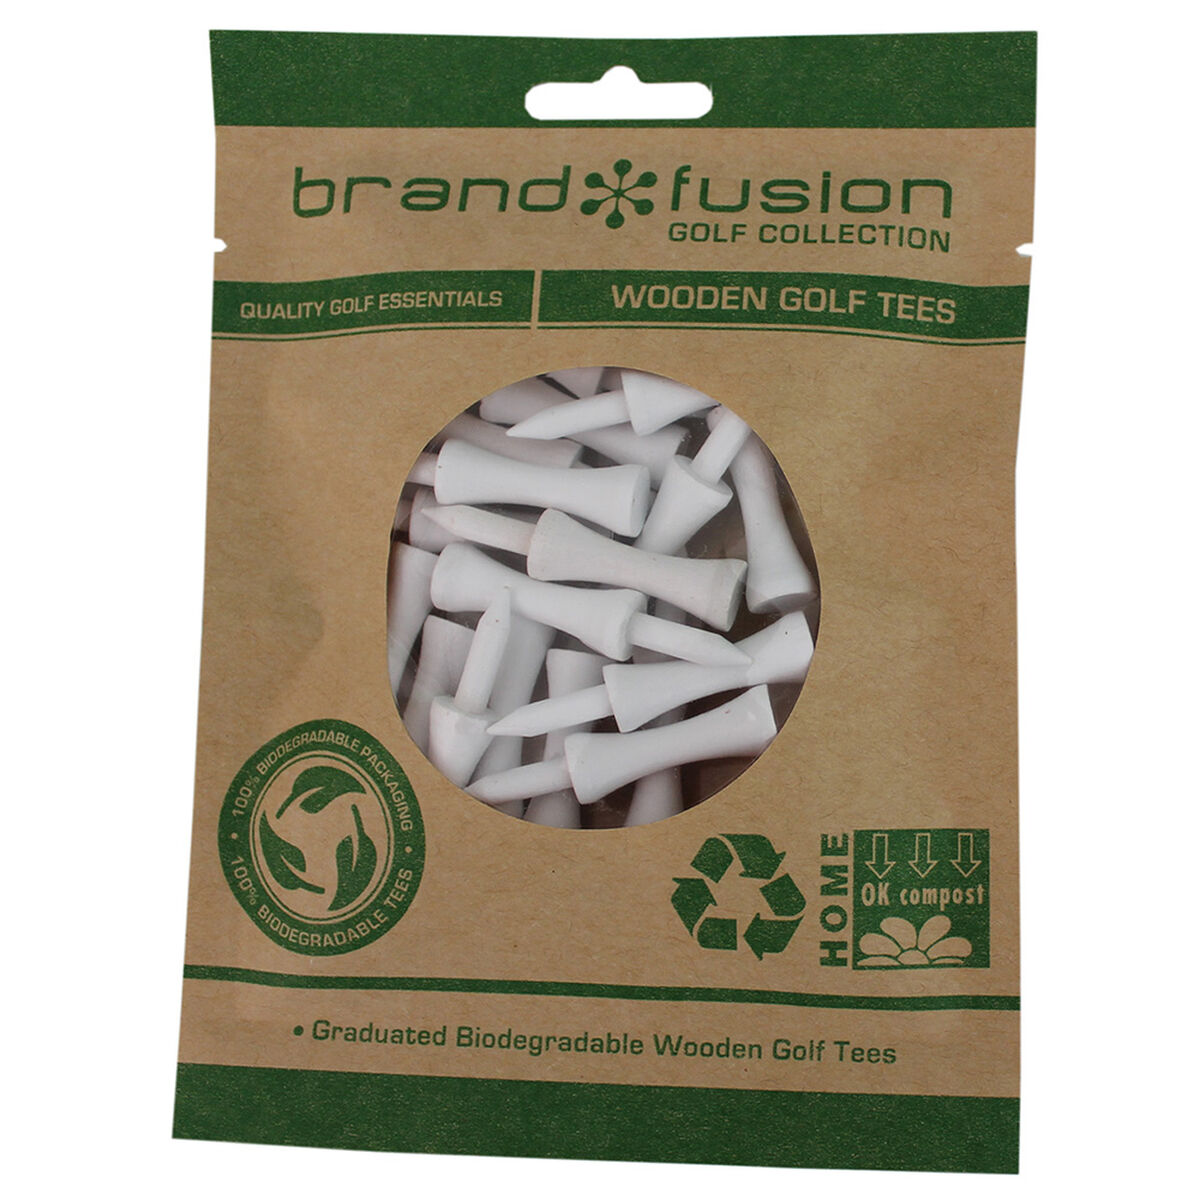 BrandFusion White Graduated Biodegradable Wooden Golf Tees, Size: 51mm | American Golf